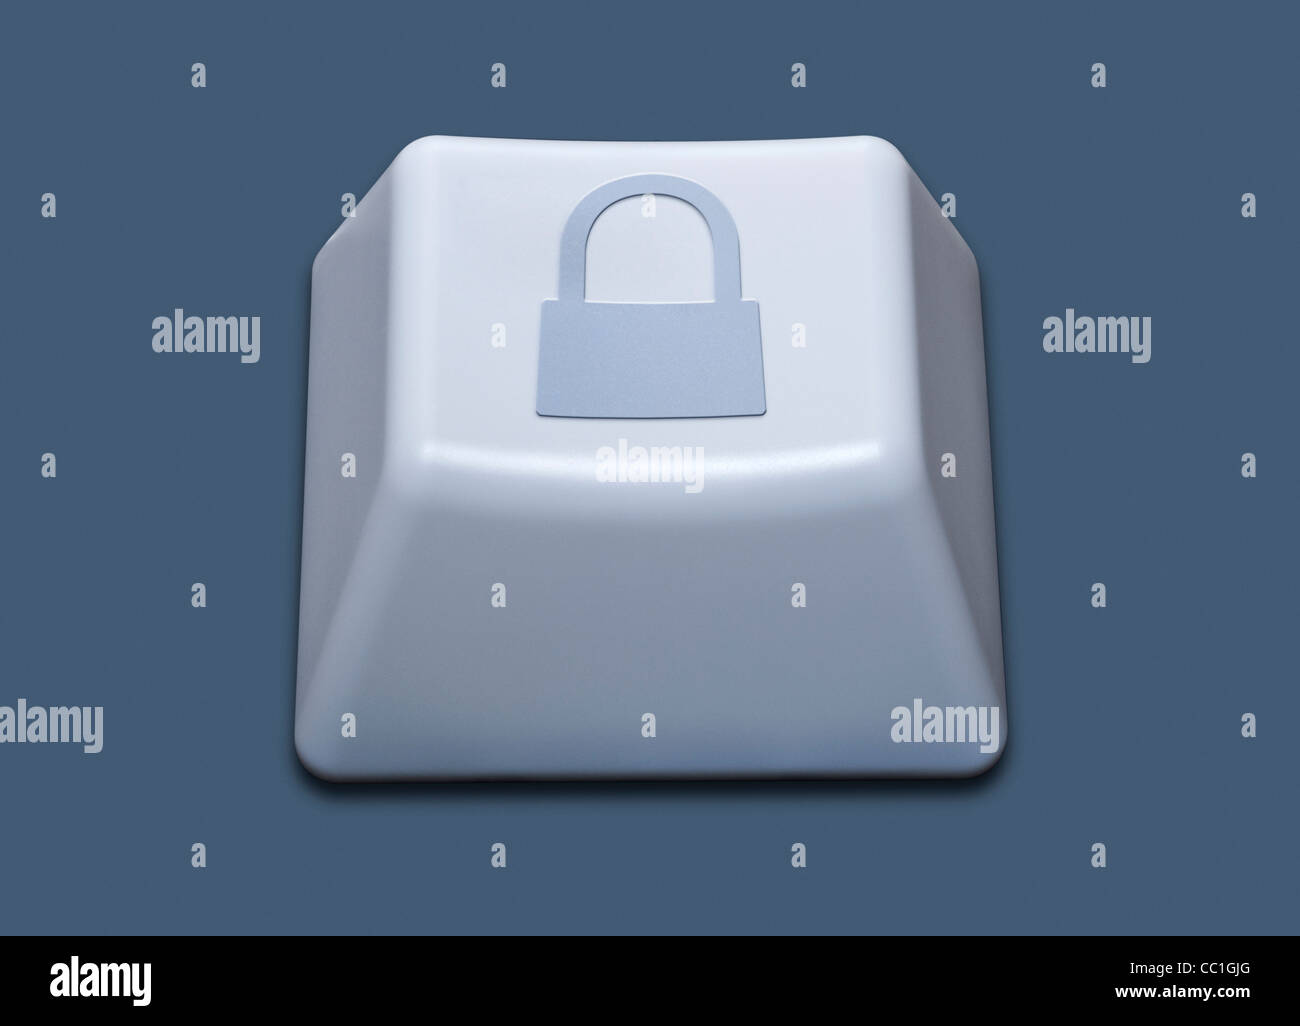 Internet Security concept. Isolated Computer Key With a padlock symbol on it. Stock Photo